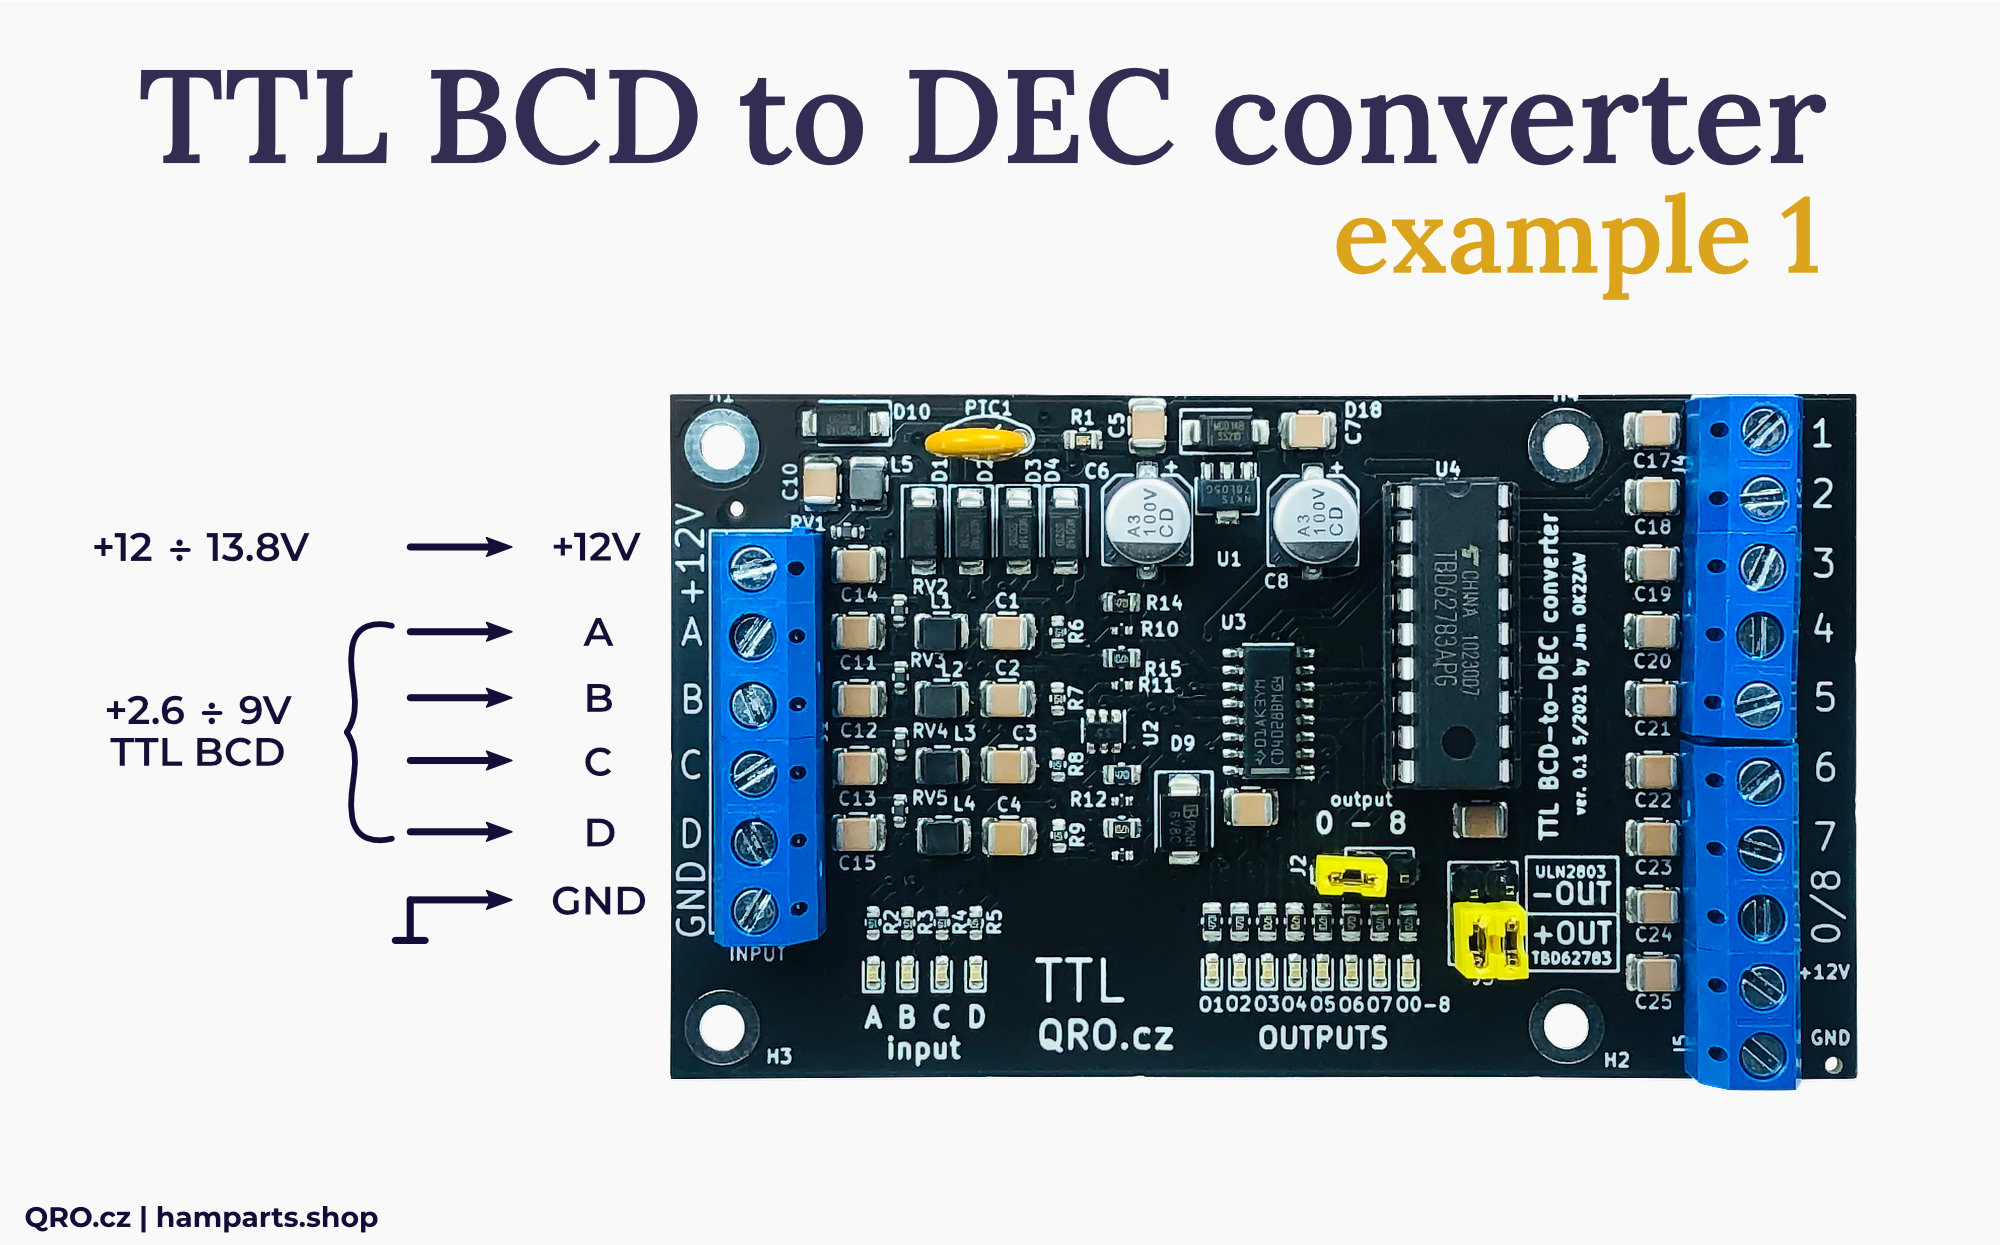 BCD to DEC TTL version converter connection example by qro.cz hamparts.shop